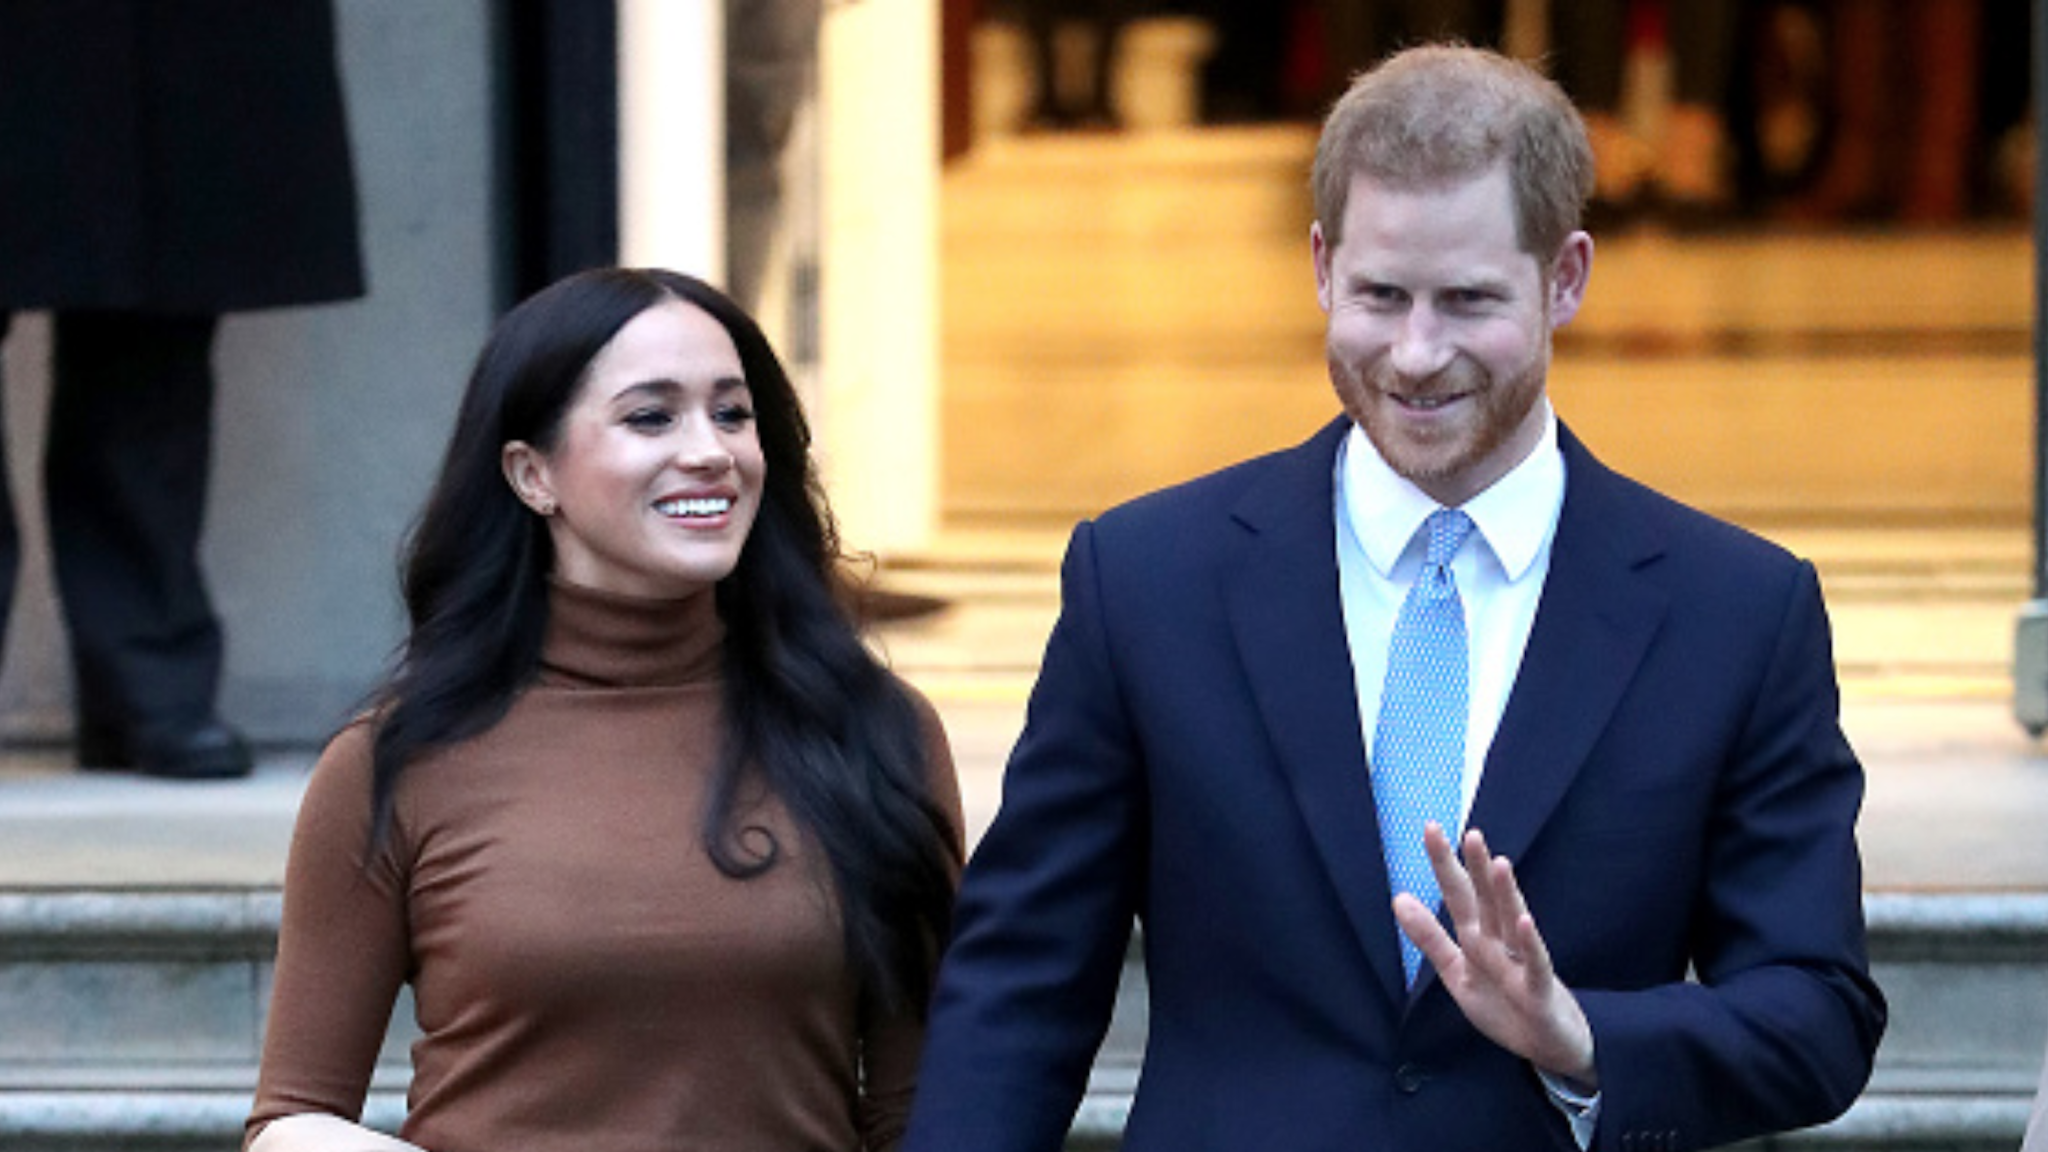 LONDON, ENGLAND - JANUARY 07: Prince Harry, Duke of Sussex and Meghan, Duchess of Sussex depart Canada House on January 07, 2020 in London, England.